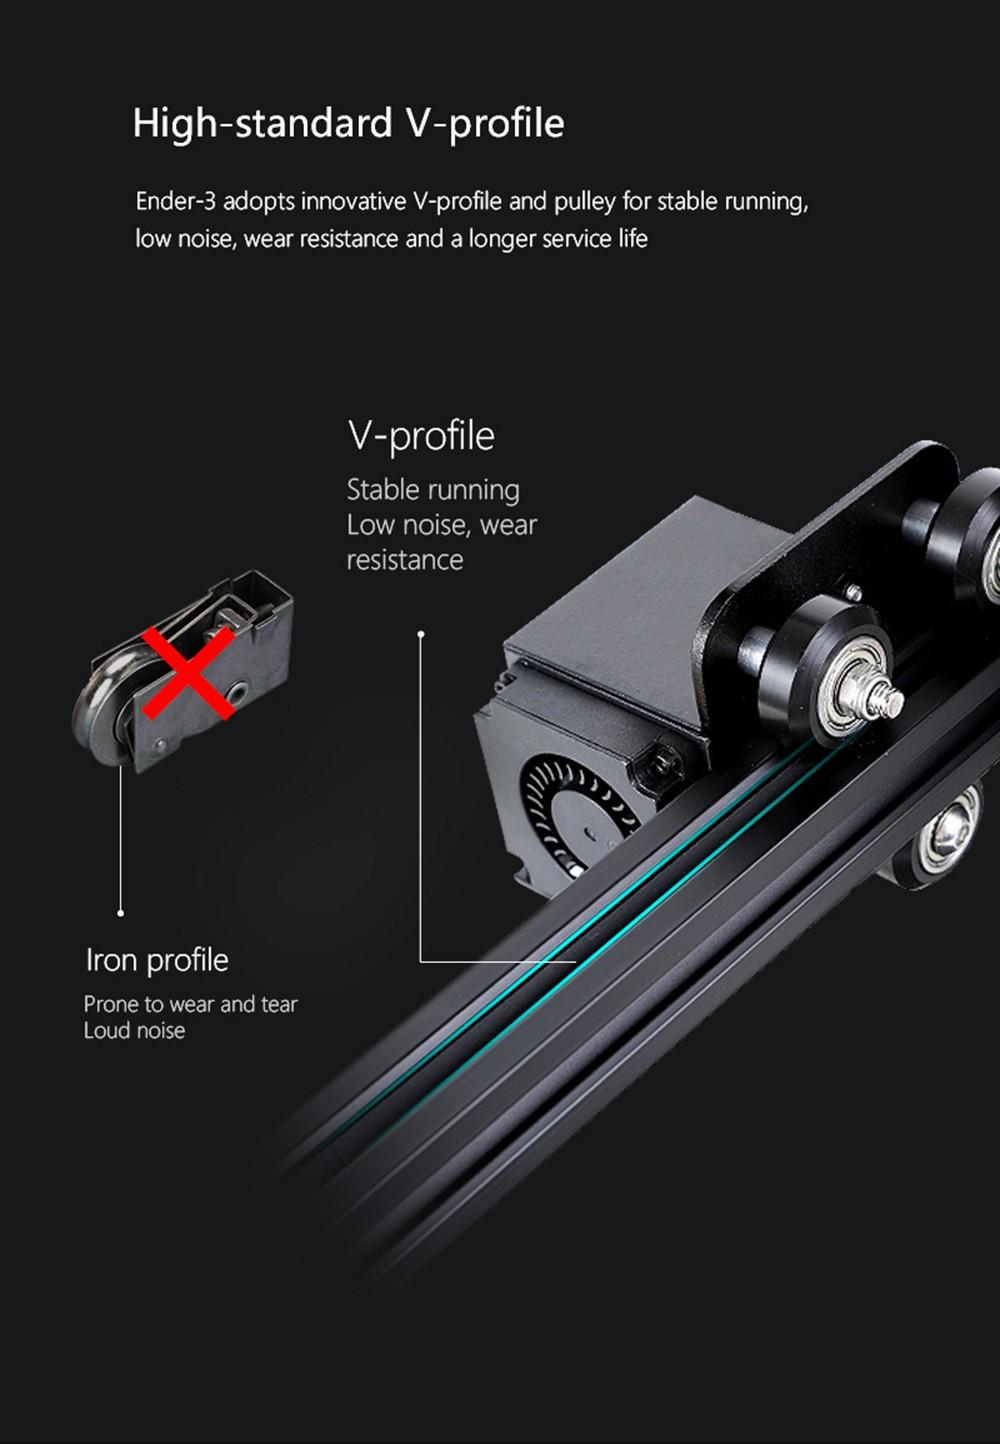 The image shows a comparison between the Ender-3s V-profile and the iron profile, highlighting the benefits of the V-profile such as stable running, low noise, wear resistance, and a longer service life.